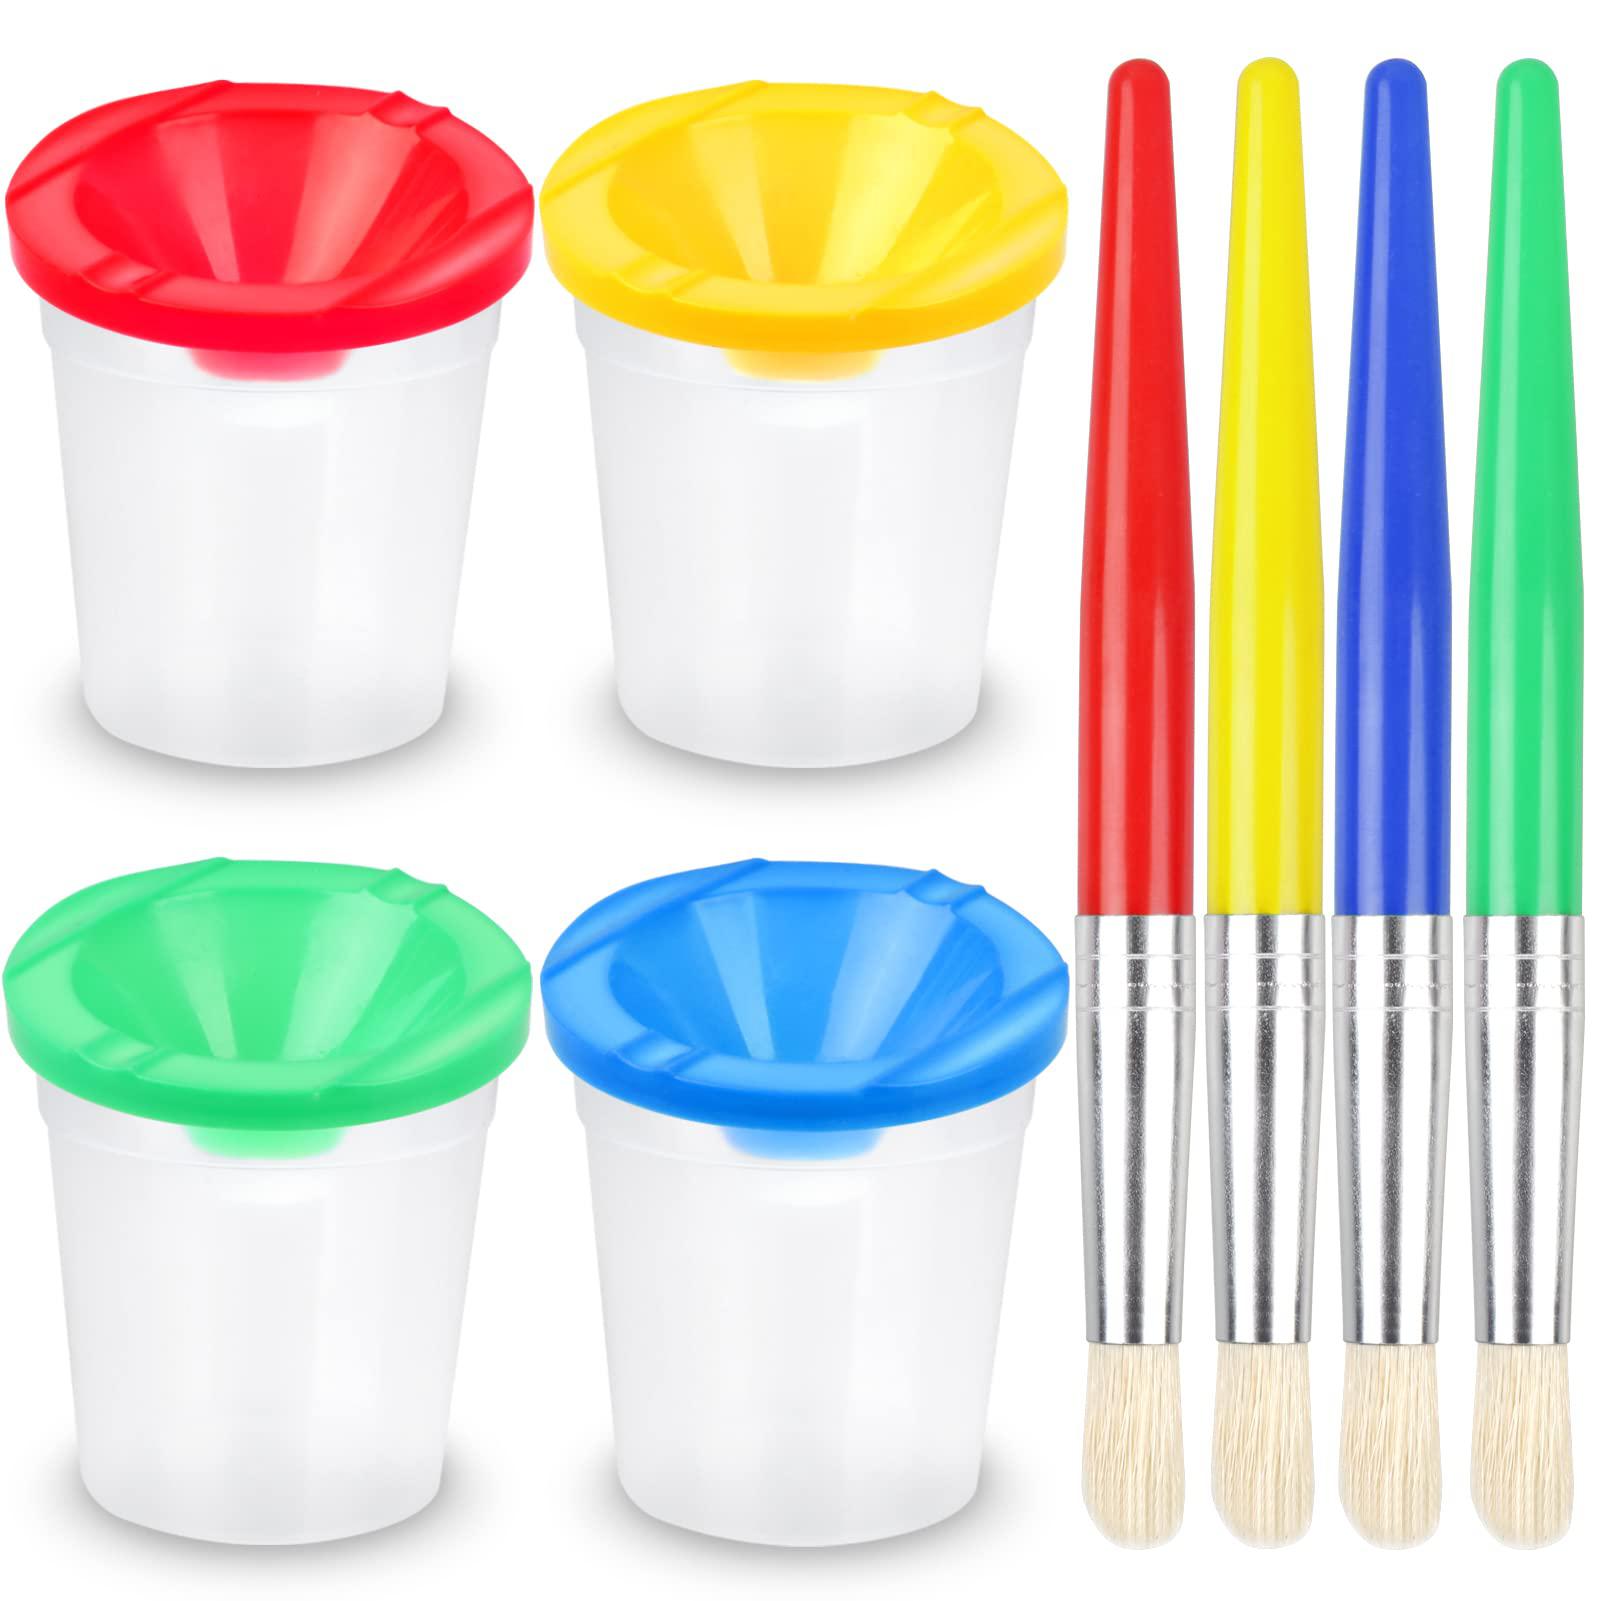 rnkp 4 pieces kids anti-spill paint cups, kids paint cups with lids,  painting paint brushes, non-spill paint cups set for tod